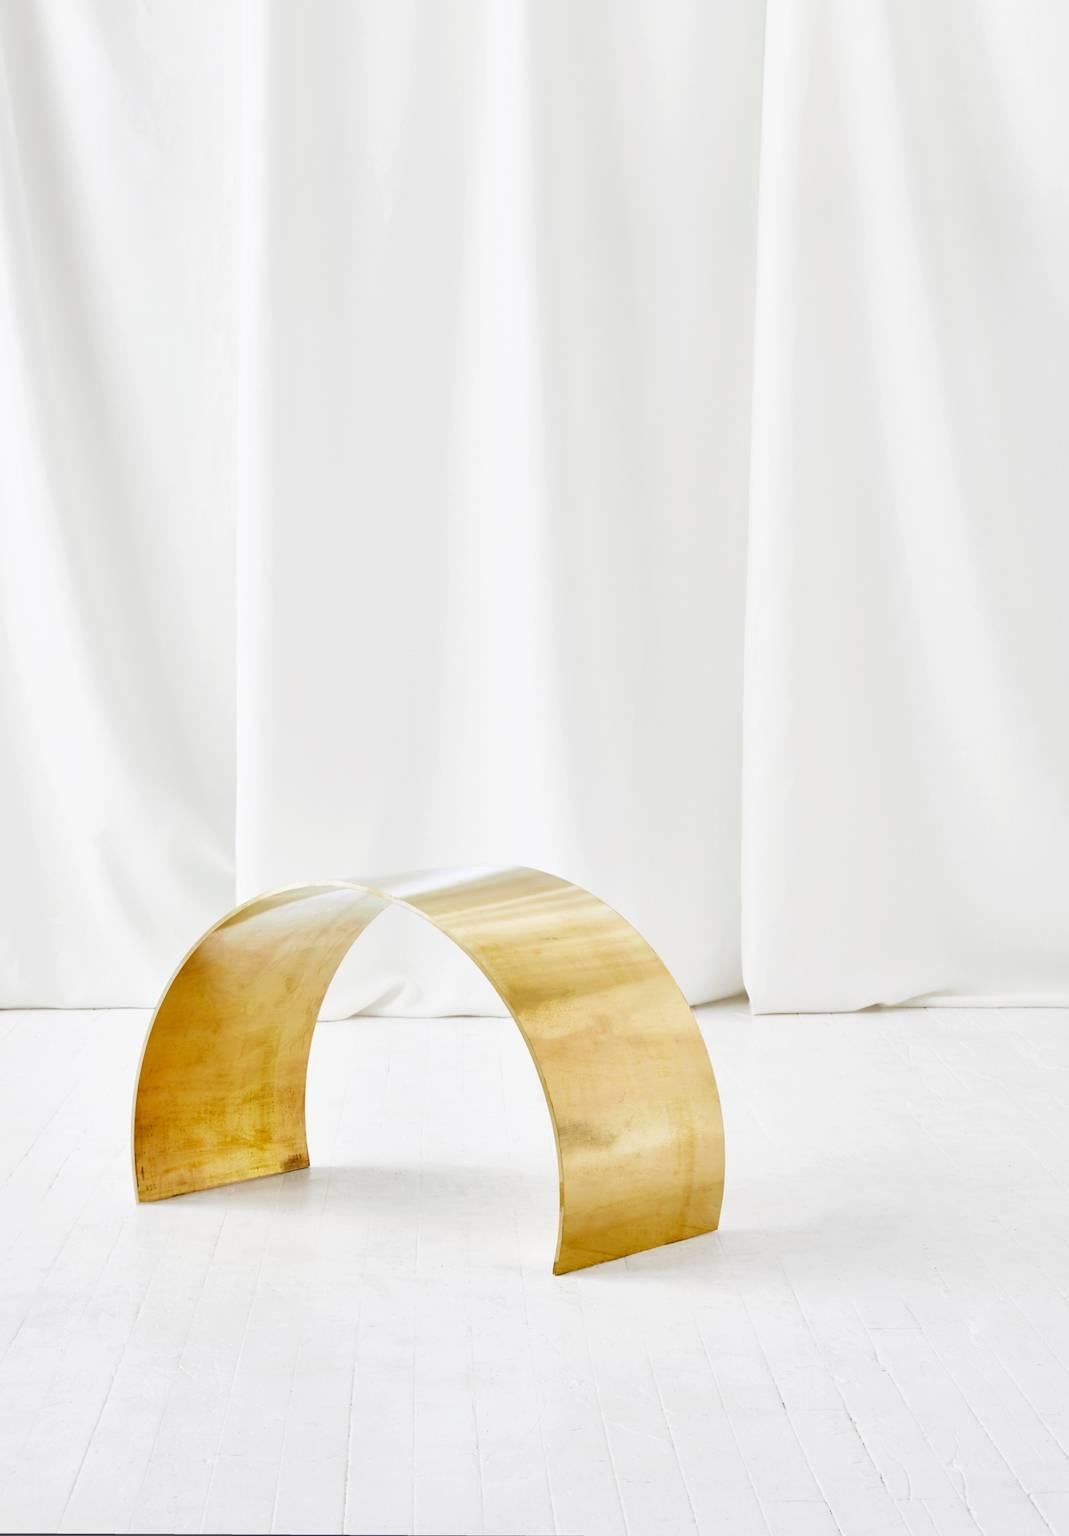 Equal parts sculpture and stool, the un-lacquered but waxed, living brass arc stool by ASH NYC is both functional and beautiful.

Inspired by forms from the renowned artist Richard Serra, the stool lends itself to being a standout piece in any home